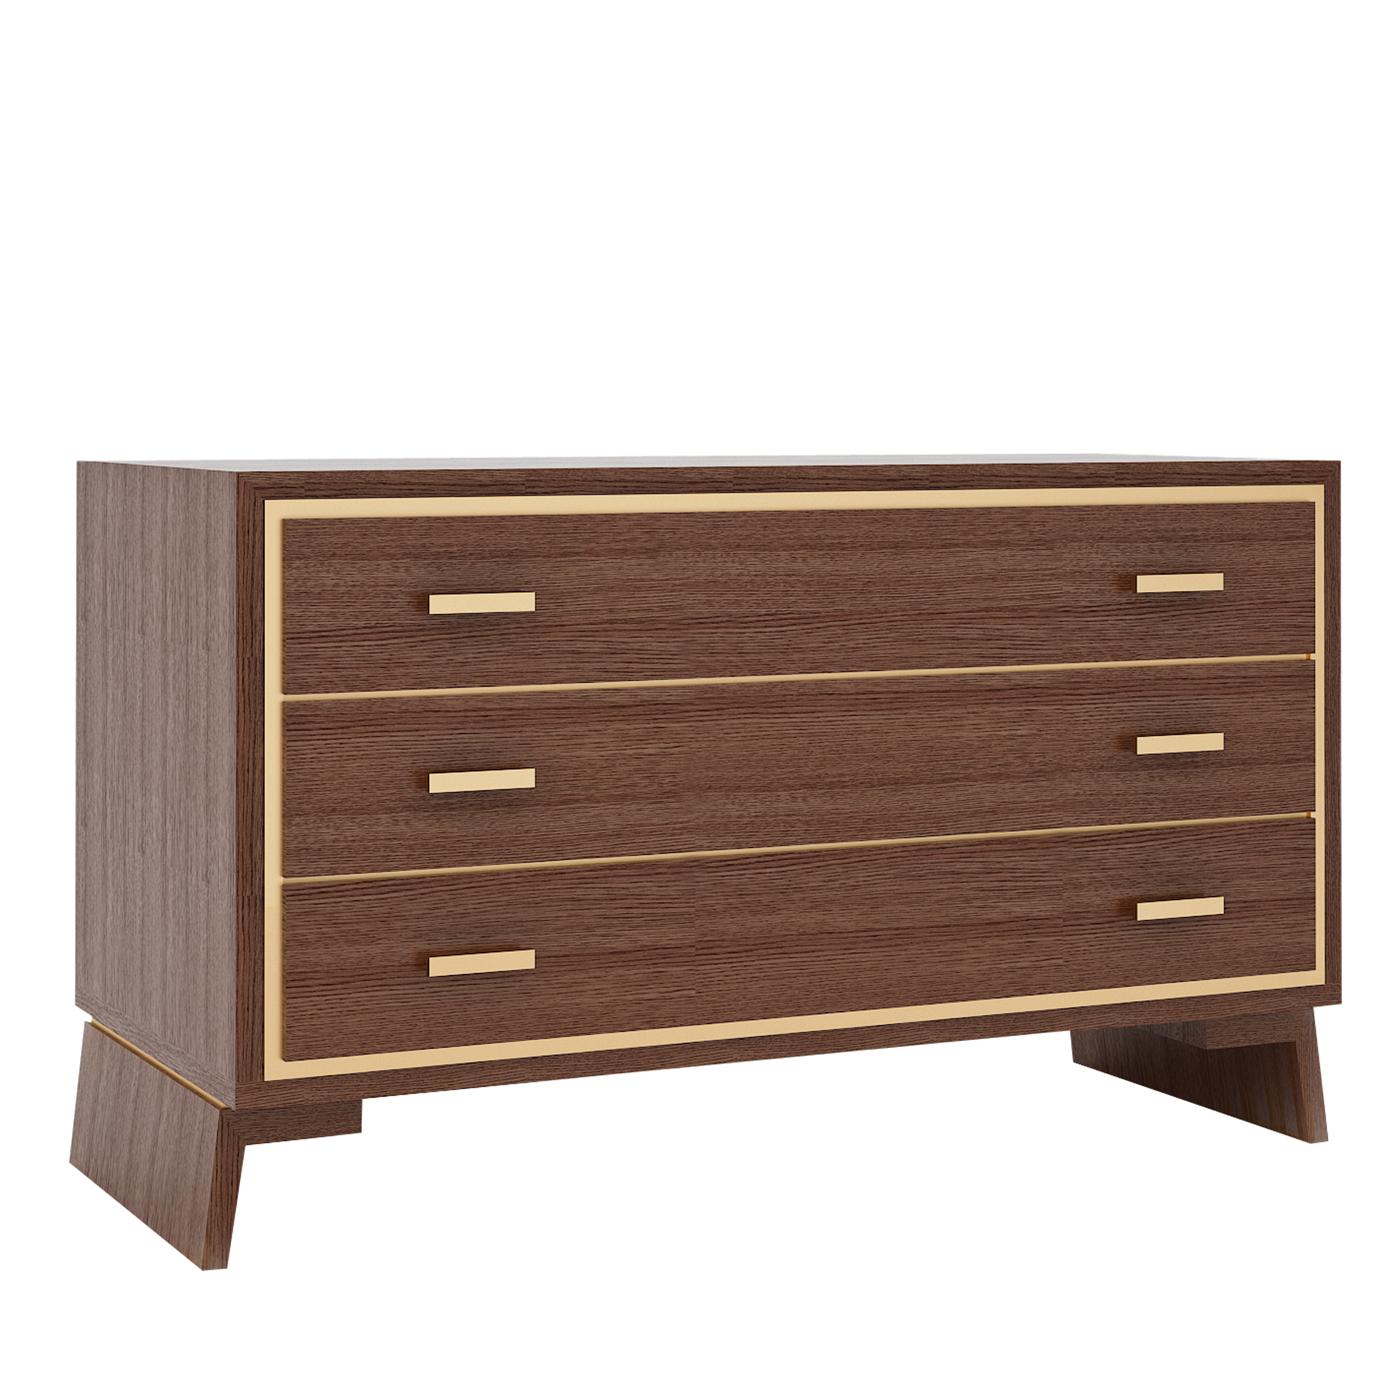 Masterfully crafted using top-quality wood, this exquisite dresser comprises three drawers with two small brass-finished metal handgrips each. A thin metal stripe in the same finish graces the entire frame of the front side, bestowing this piece an